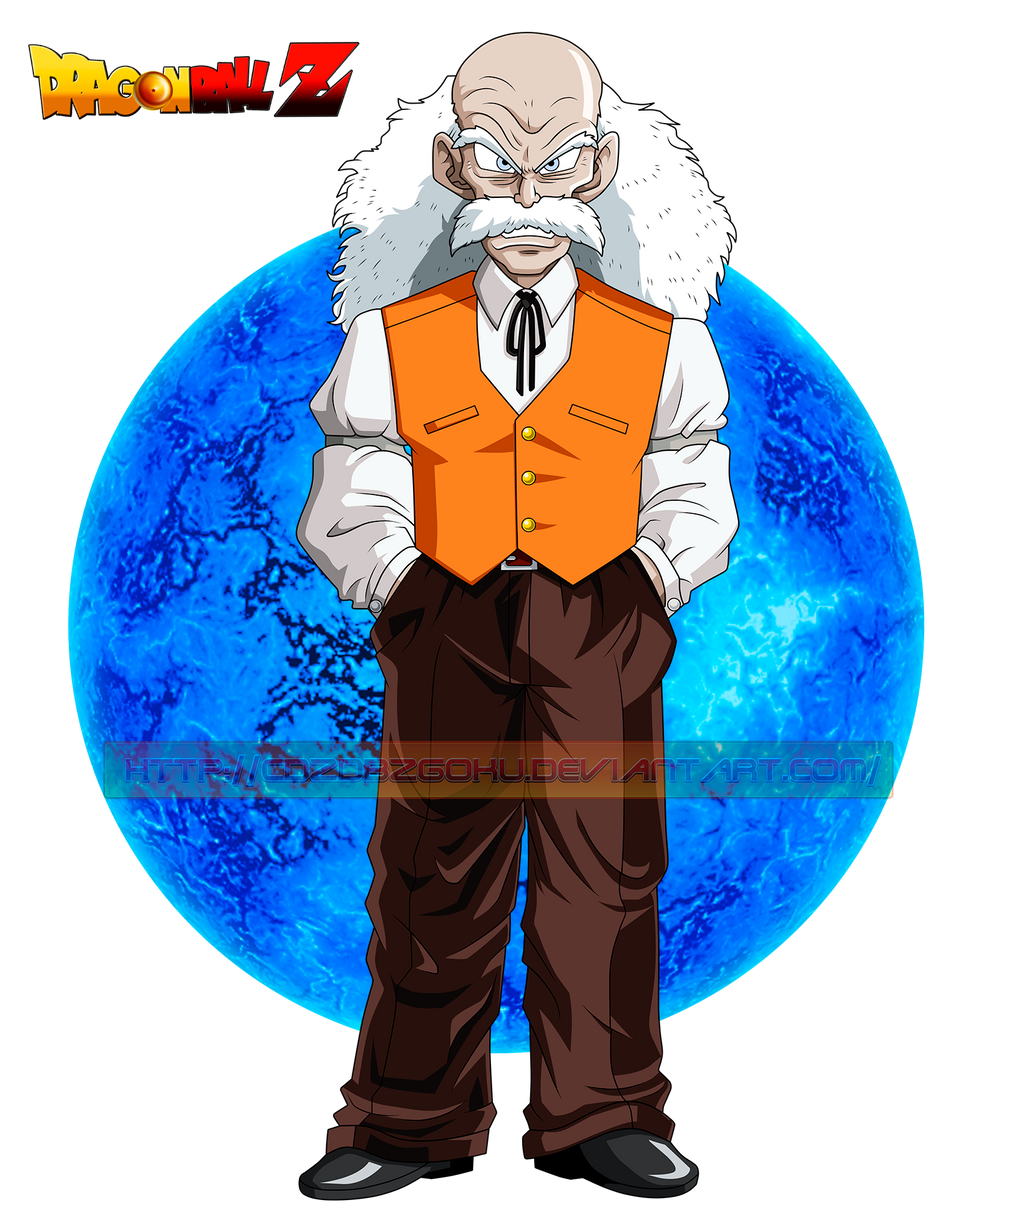 Dragon Ball Z - Android 19 by DBCProject on DeviantArt